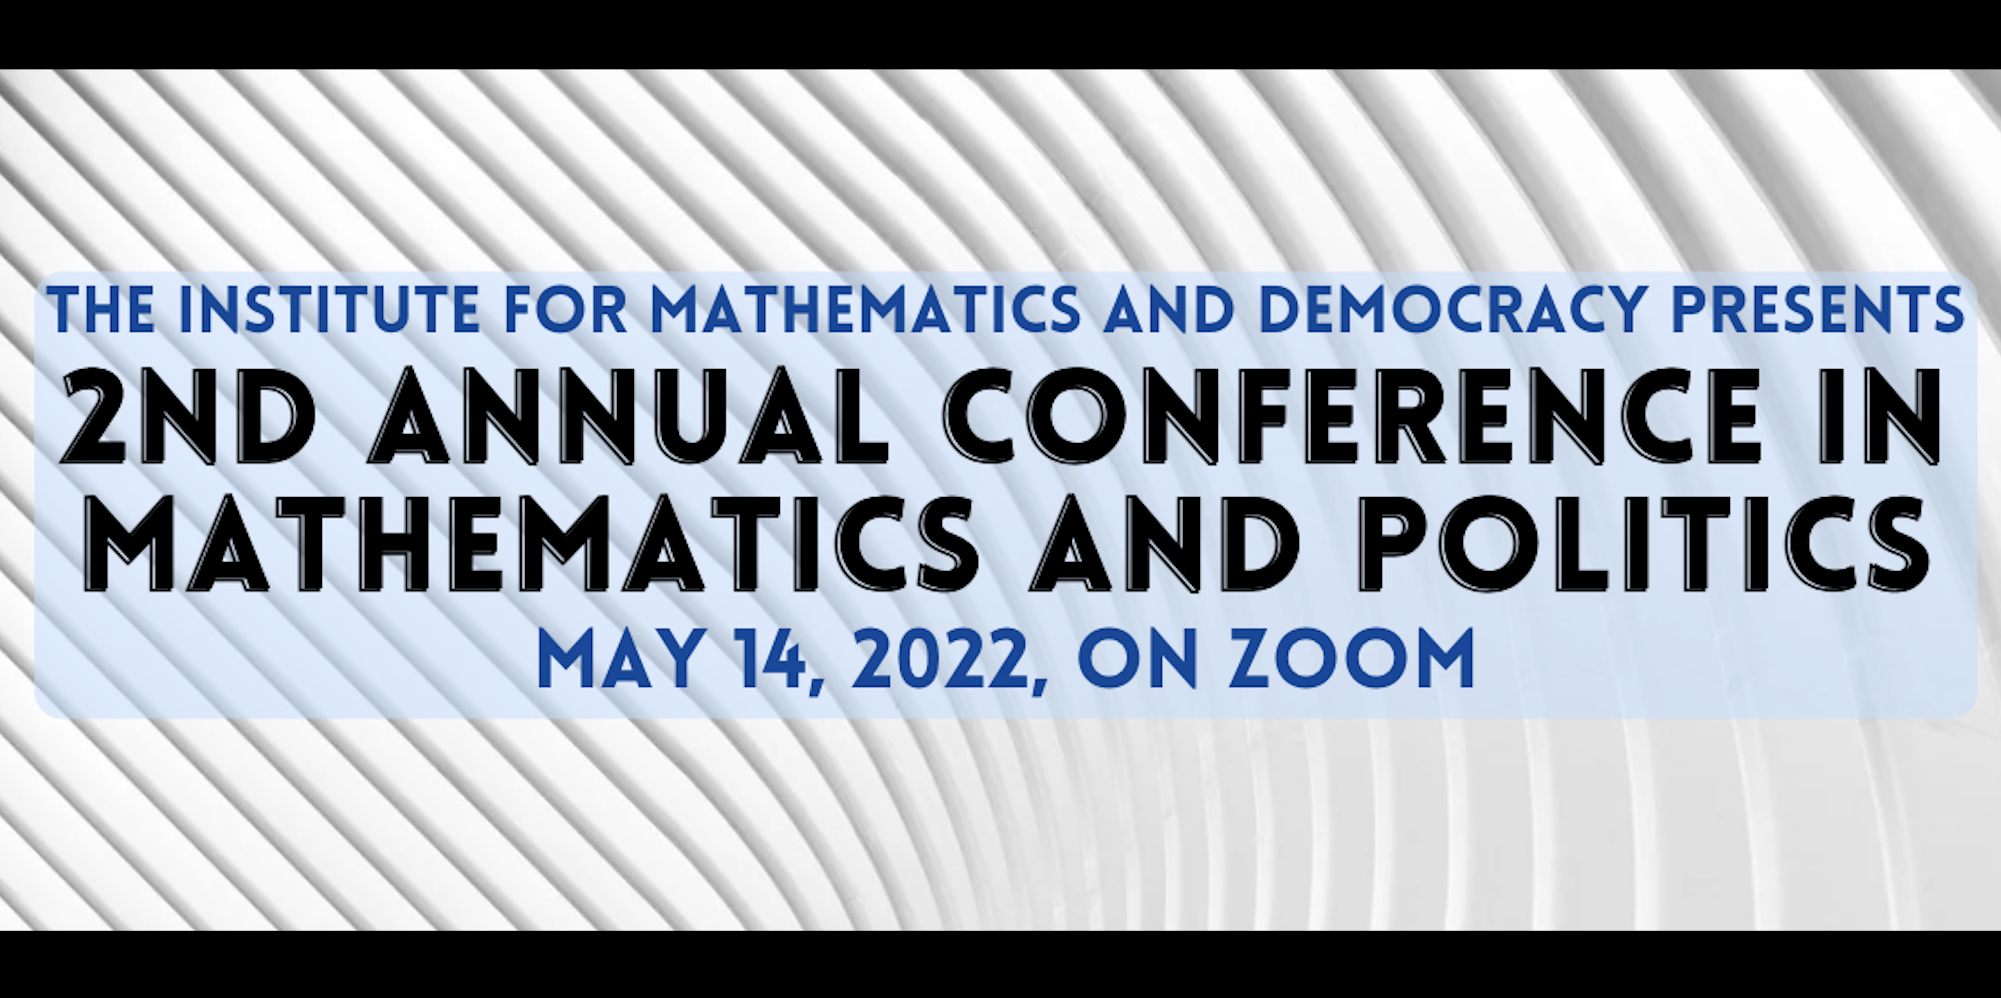 2nd Annual Conference in Mathematics and Politics